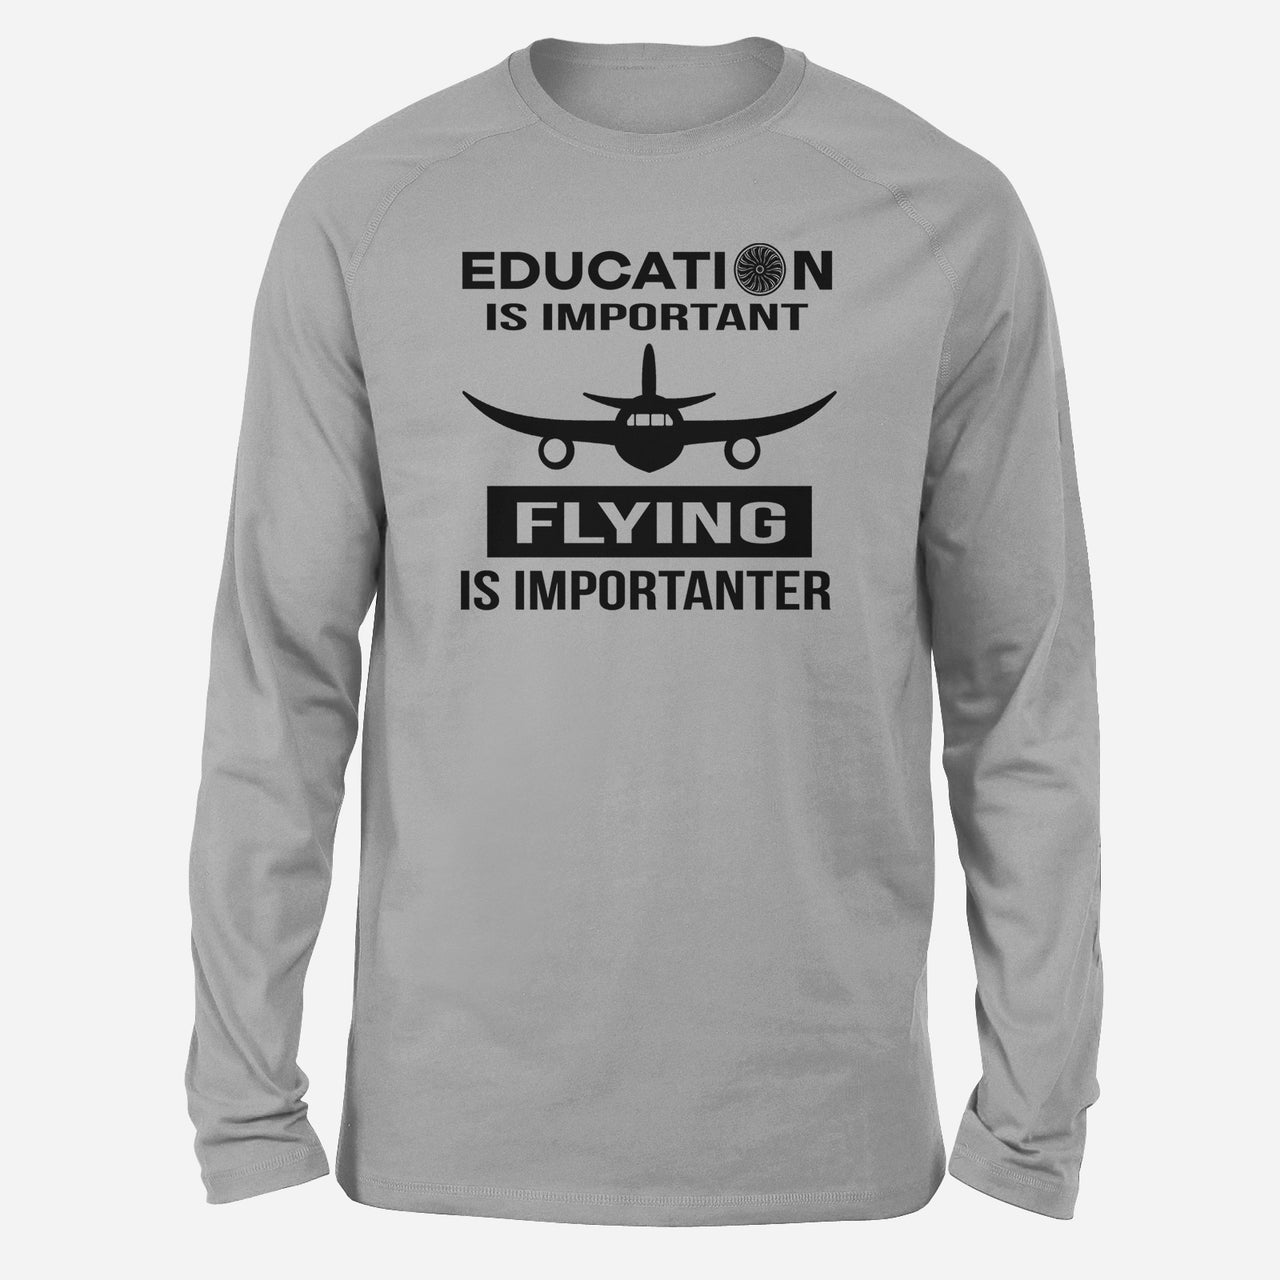 Flying is Importanter Designed Long-Sleeve T-Shirts